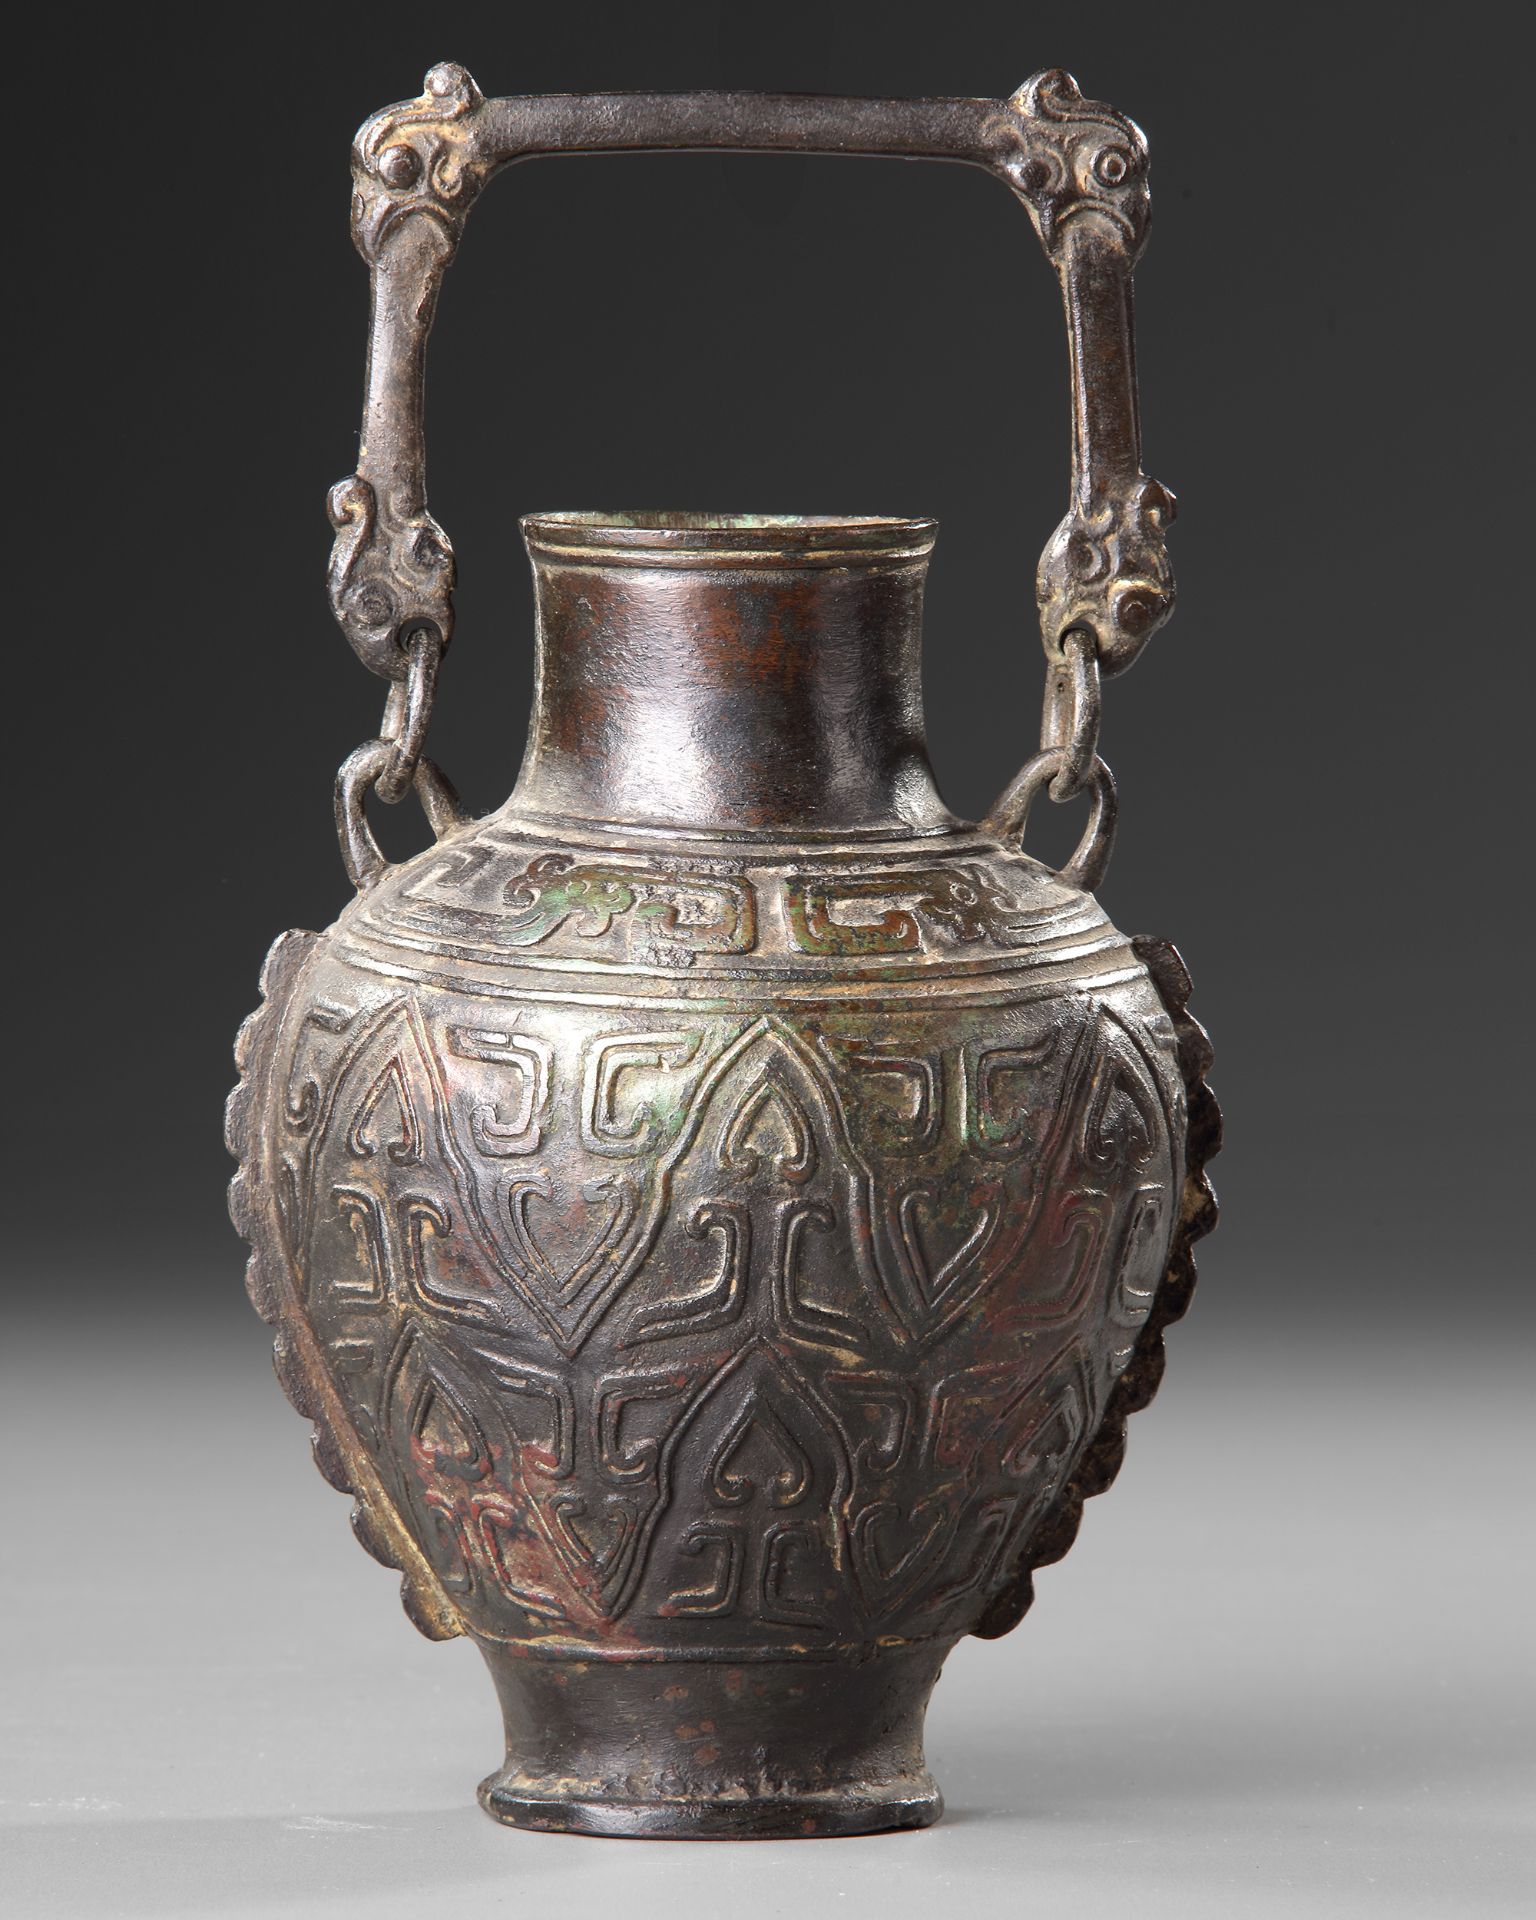 A CHINESE ARCHAISTIC BRONZE VASE, SONG DYNASTY (960 - 1279)